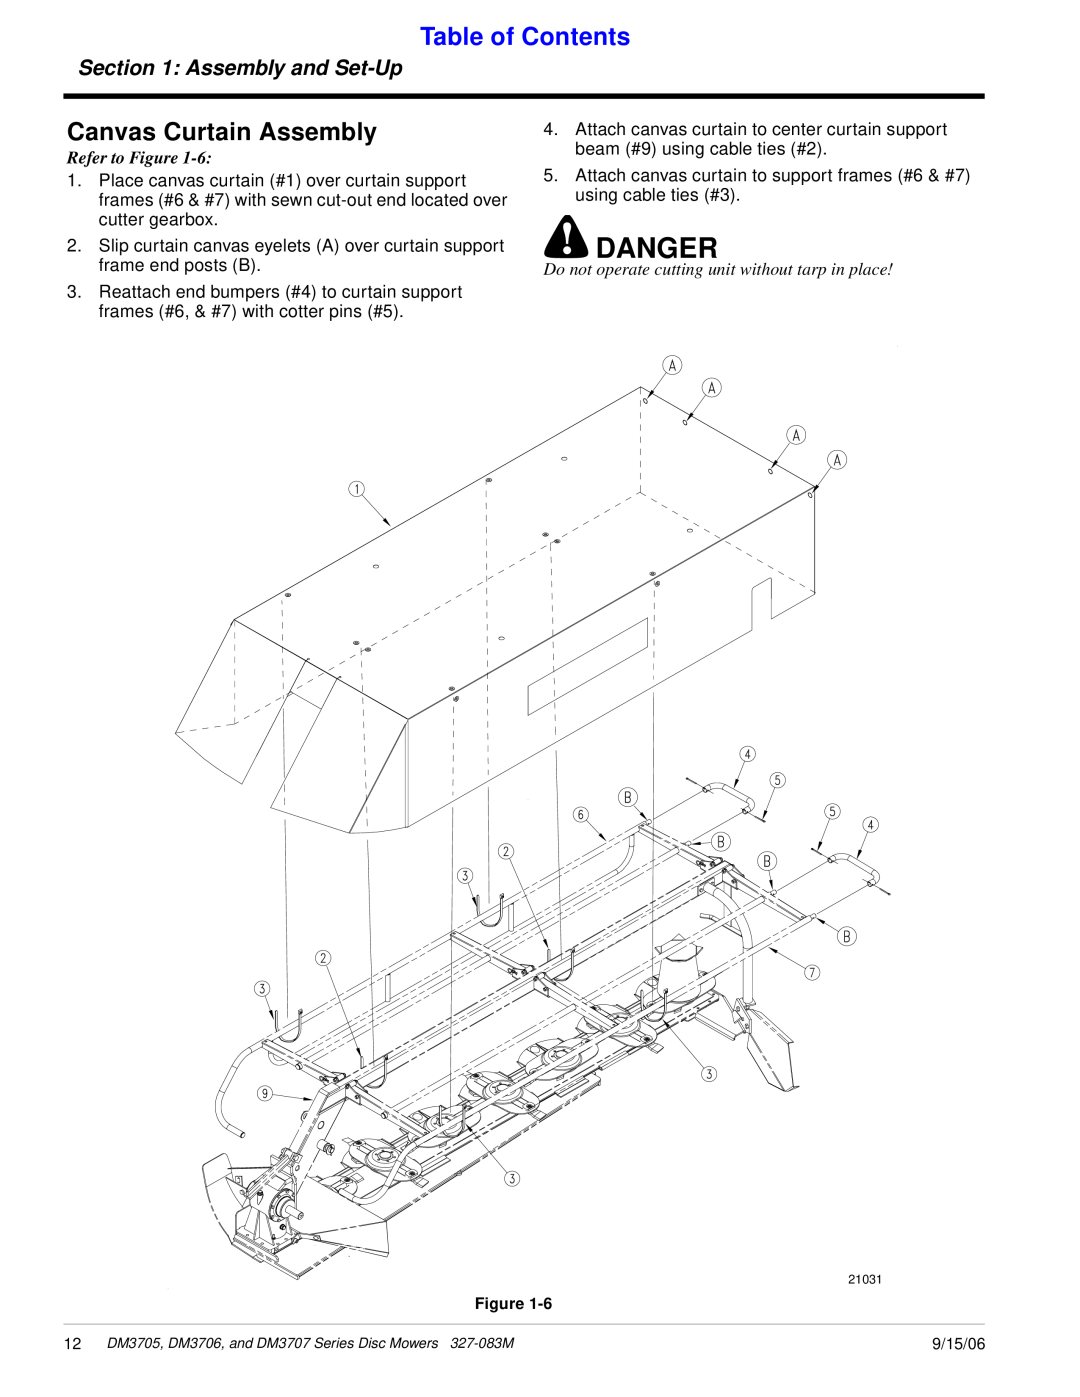 Land Pride DM3707 Series manual Danger, Canvas Curtain Assembly, Table of Contents, Assembly and Set-Up, Refer to Figure 